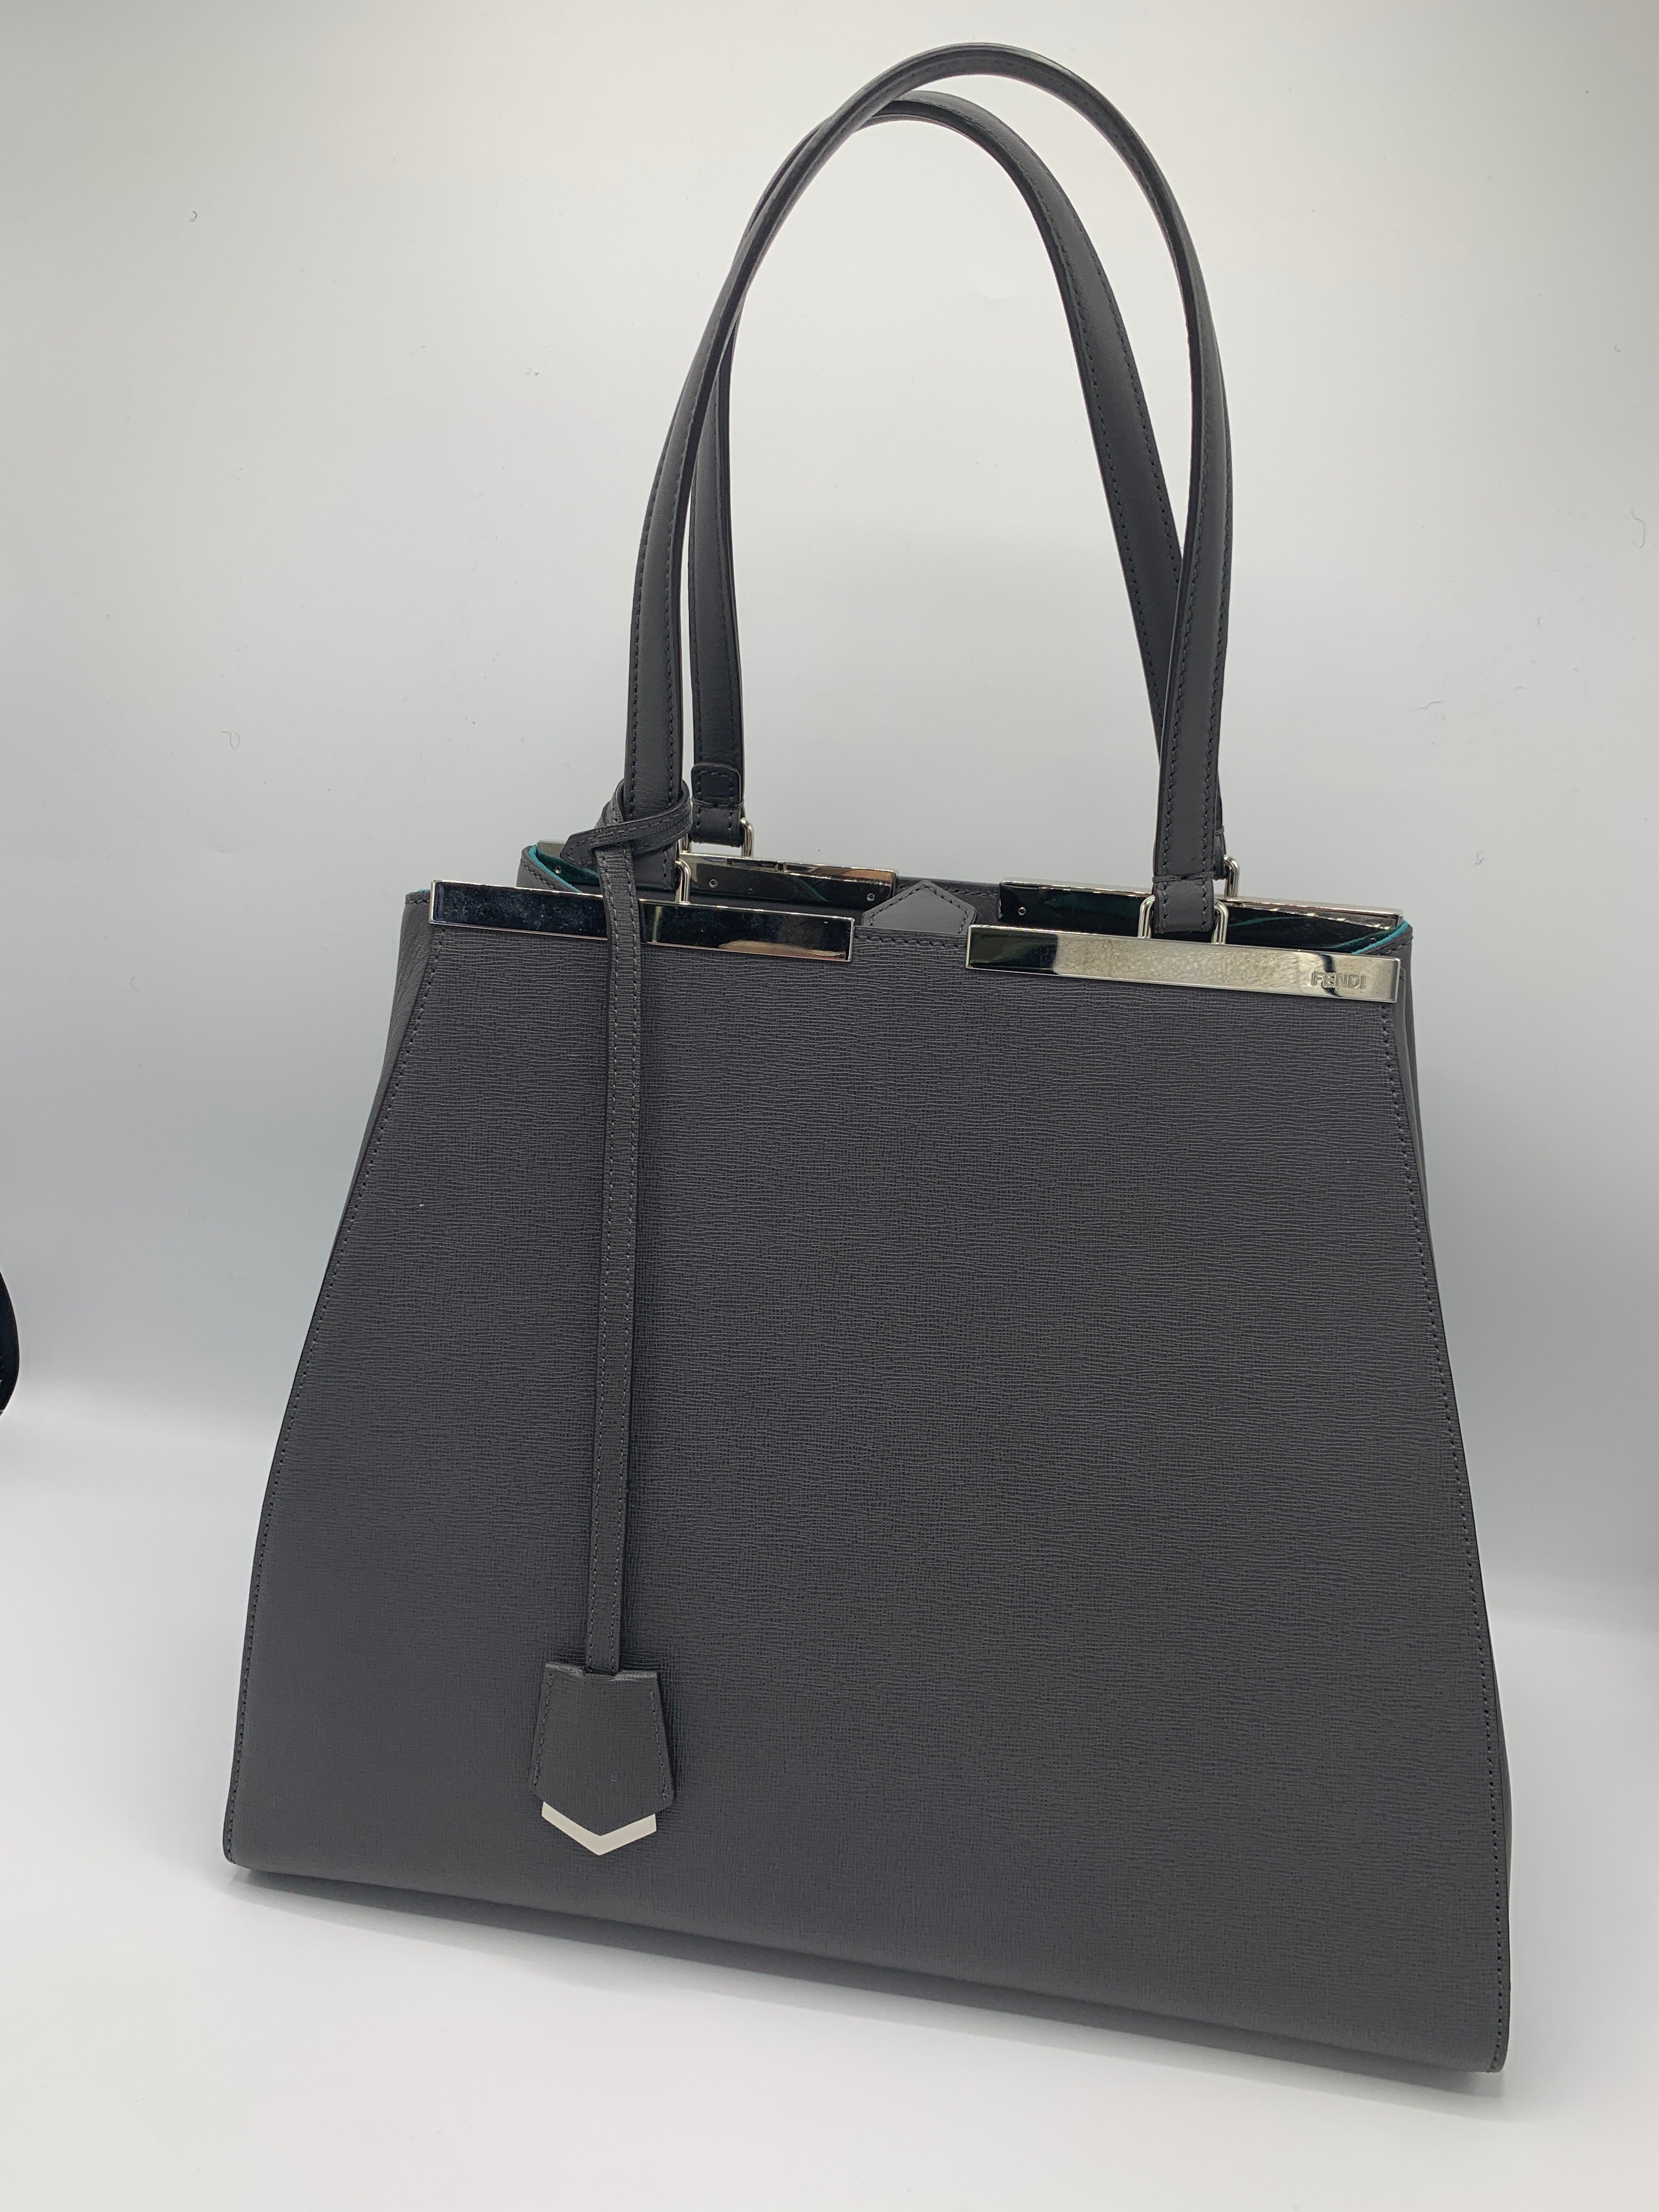 Fendi 2jours in grey saffiano leather with green suede lining